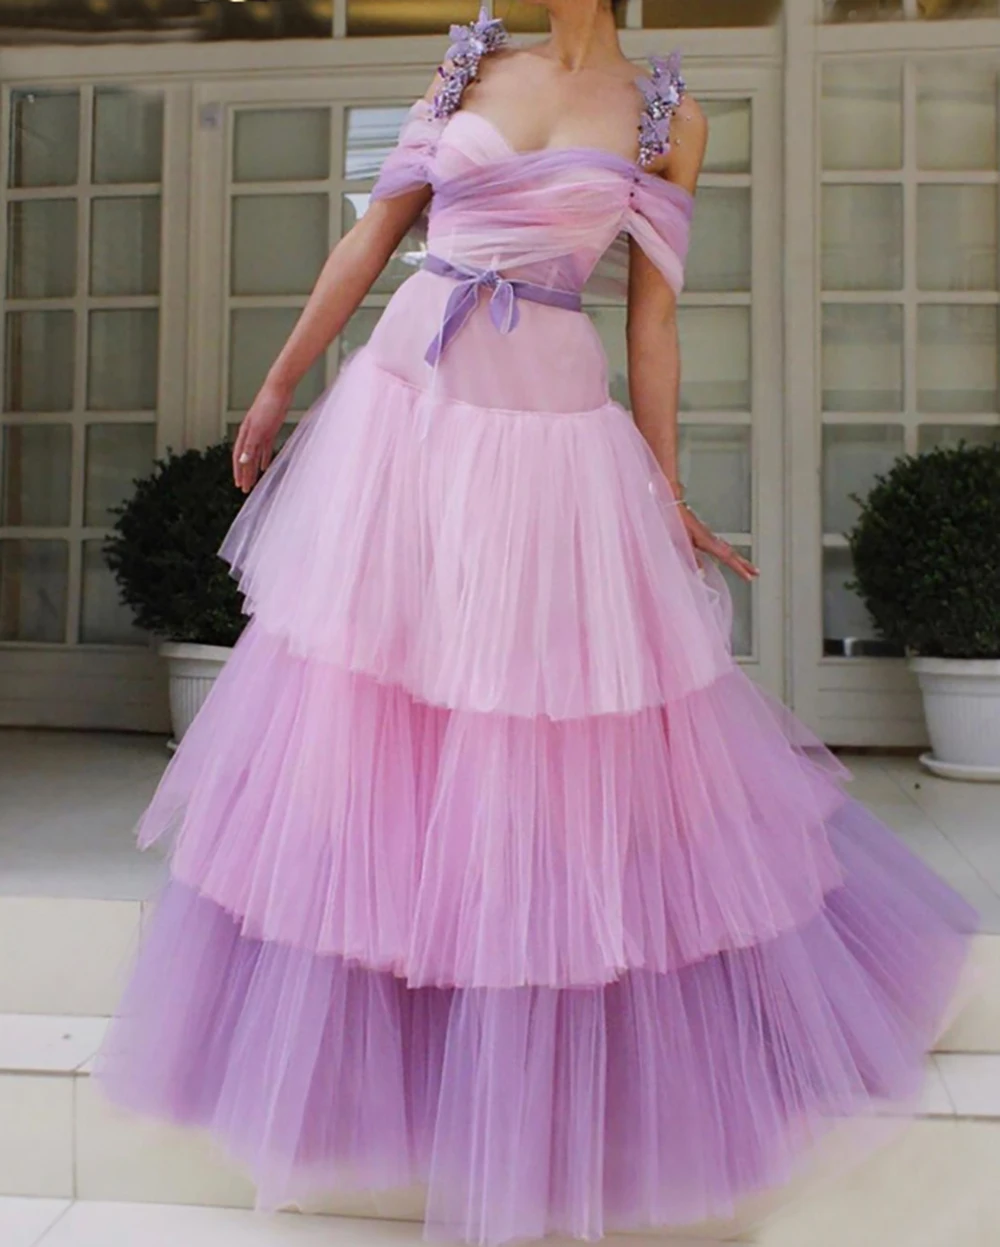 

Colorful Prom Dresses Ball Gown Flowers Beaded Straps Party Maxys Long Prom Gown Evening Dresses Robe De Soiree